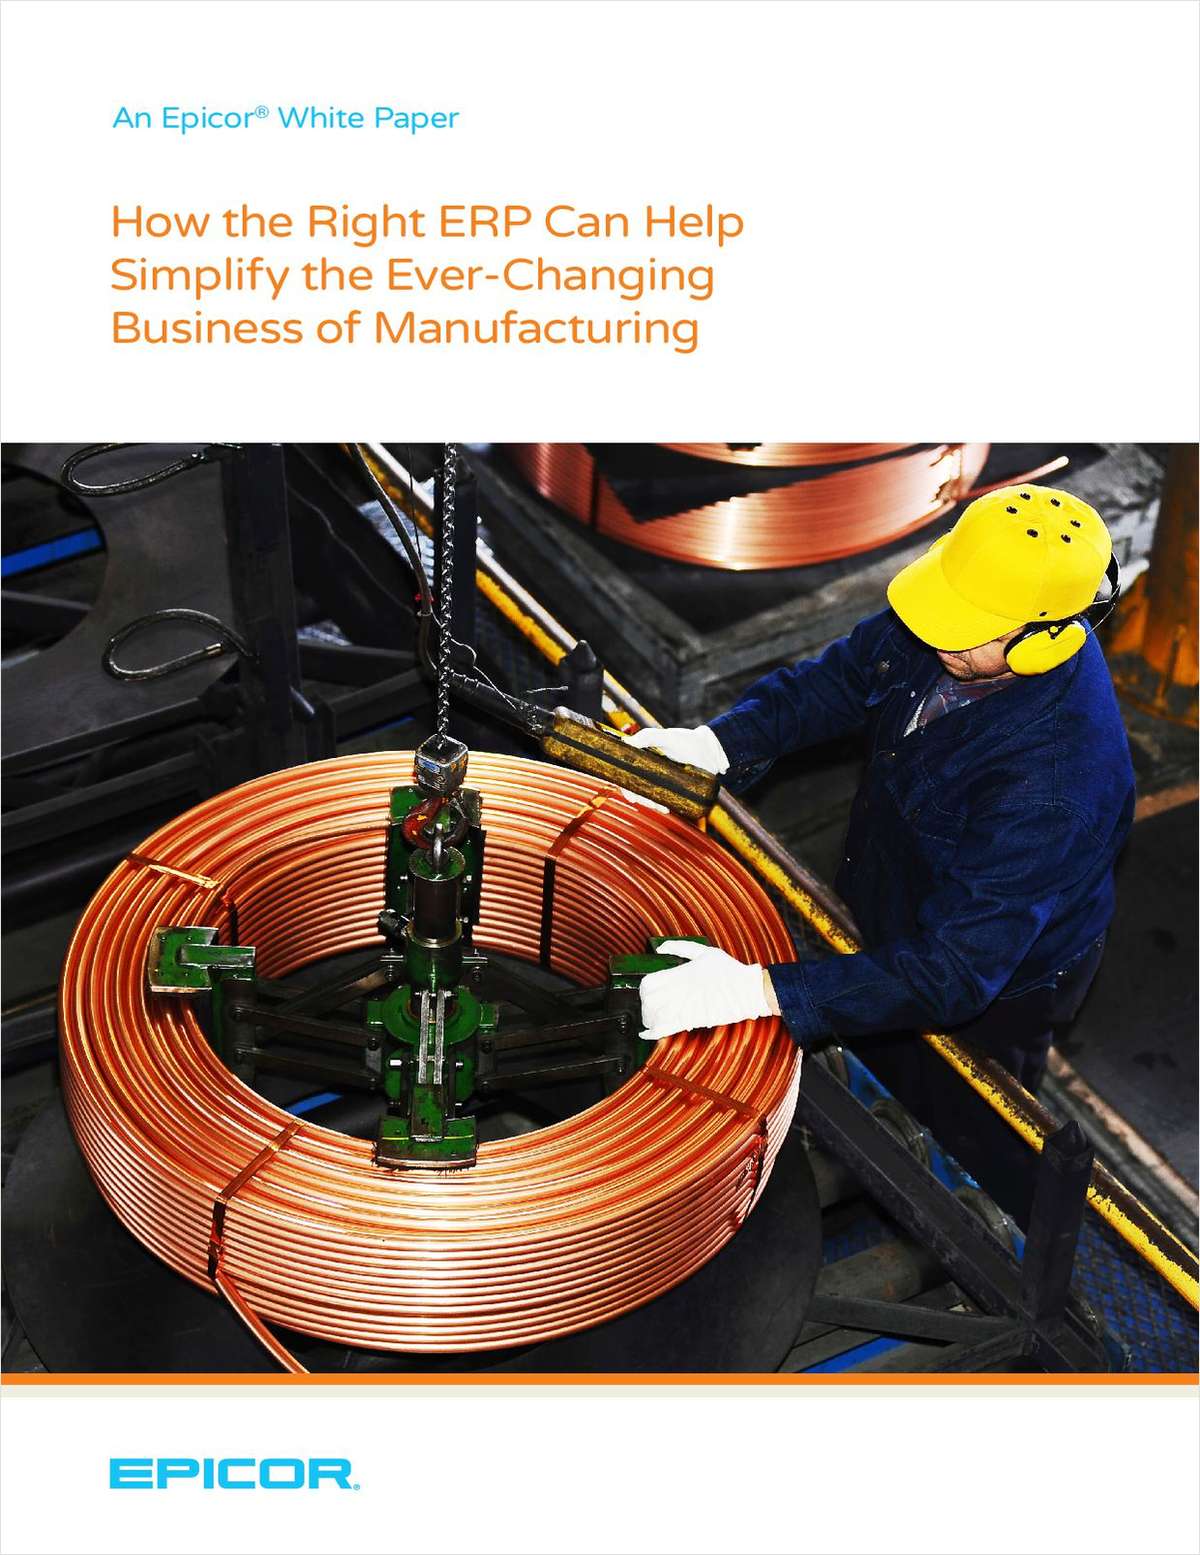 How the Right ERP Can Help Simplify the Ever-Changing Business of Manufacturing